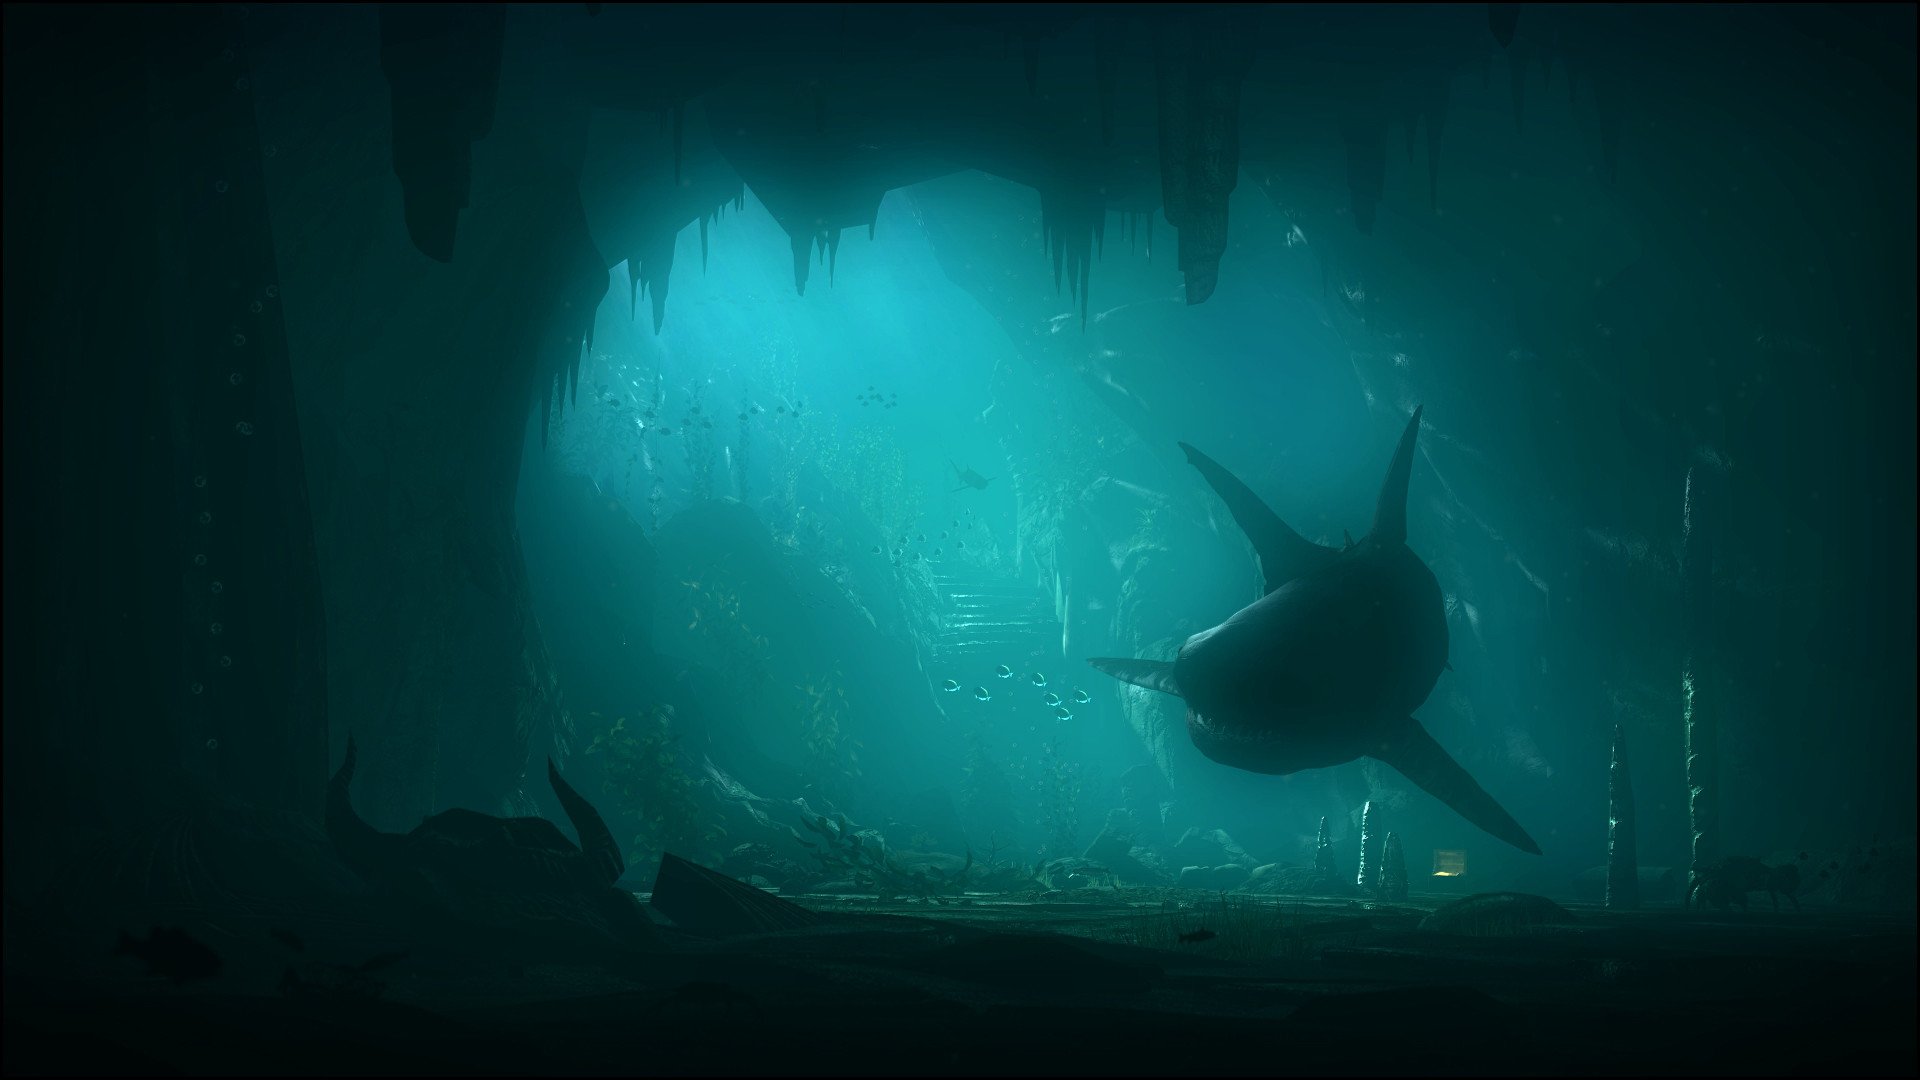 1920x1080 The Last Megalodon by mask1985